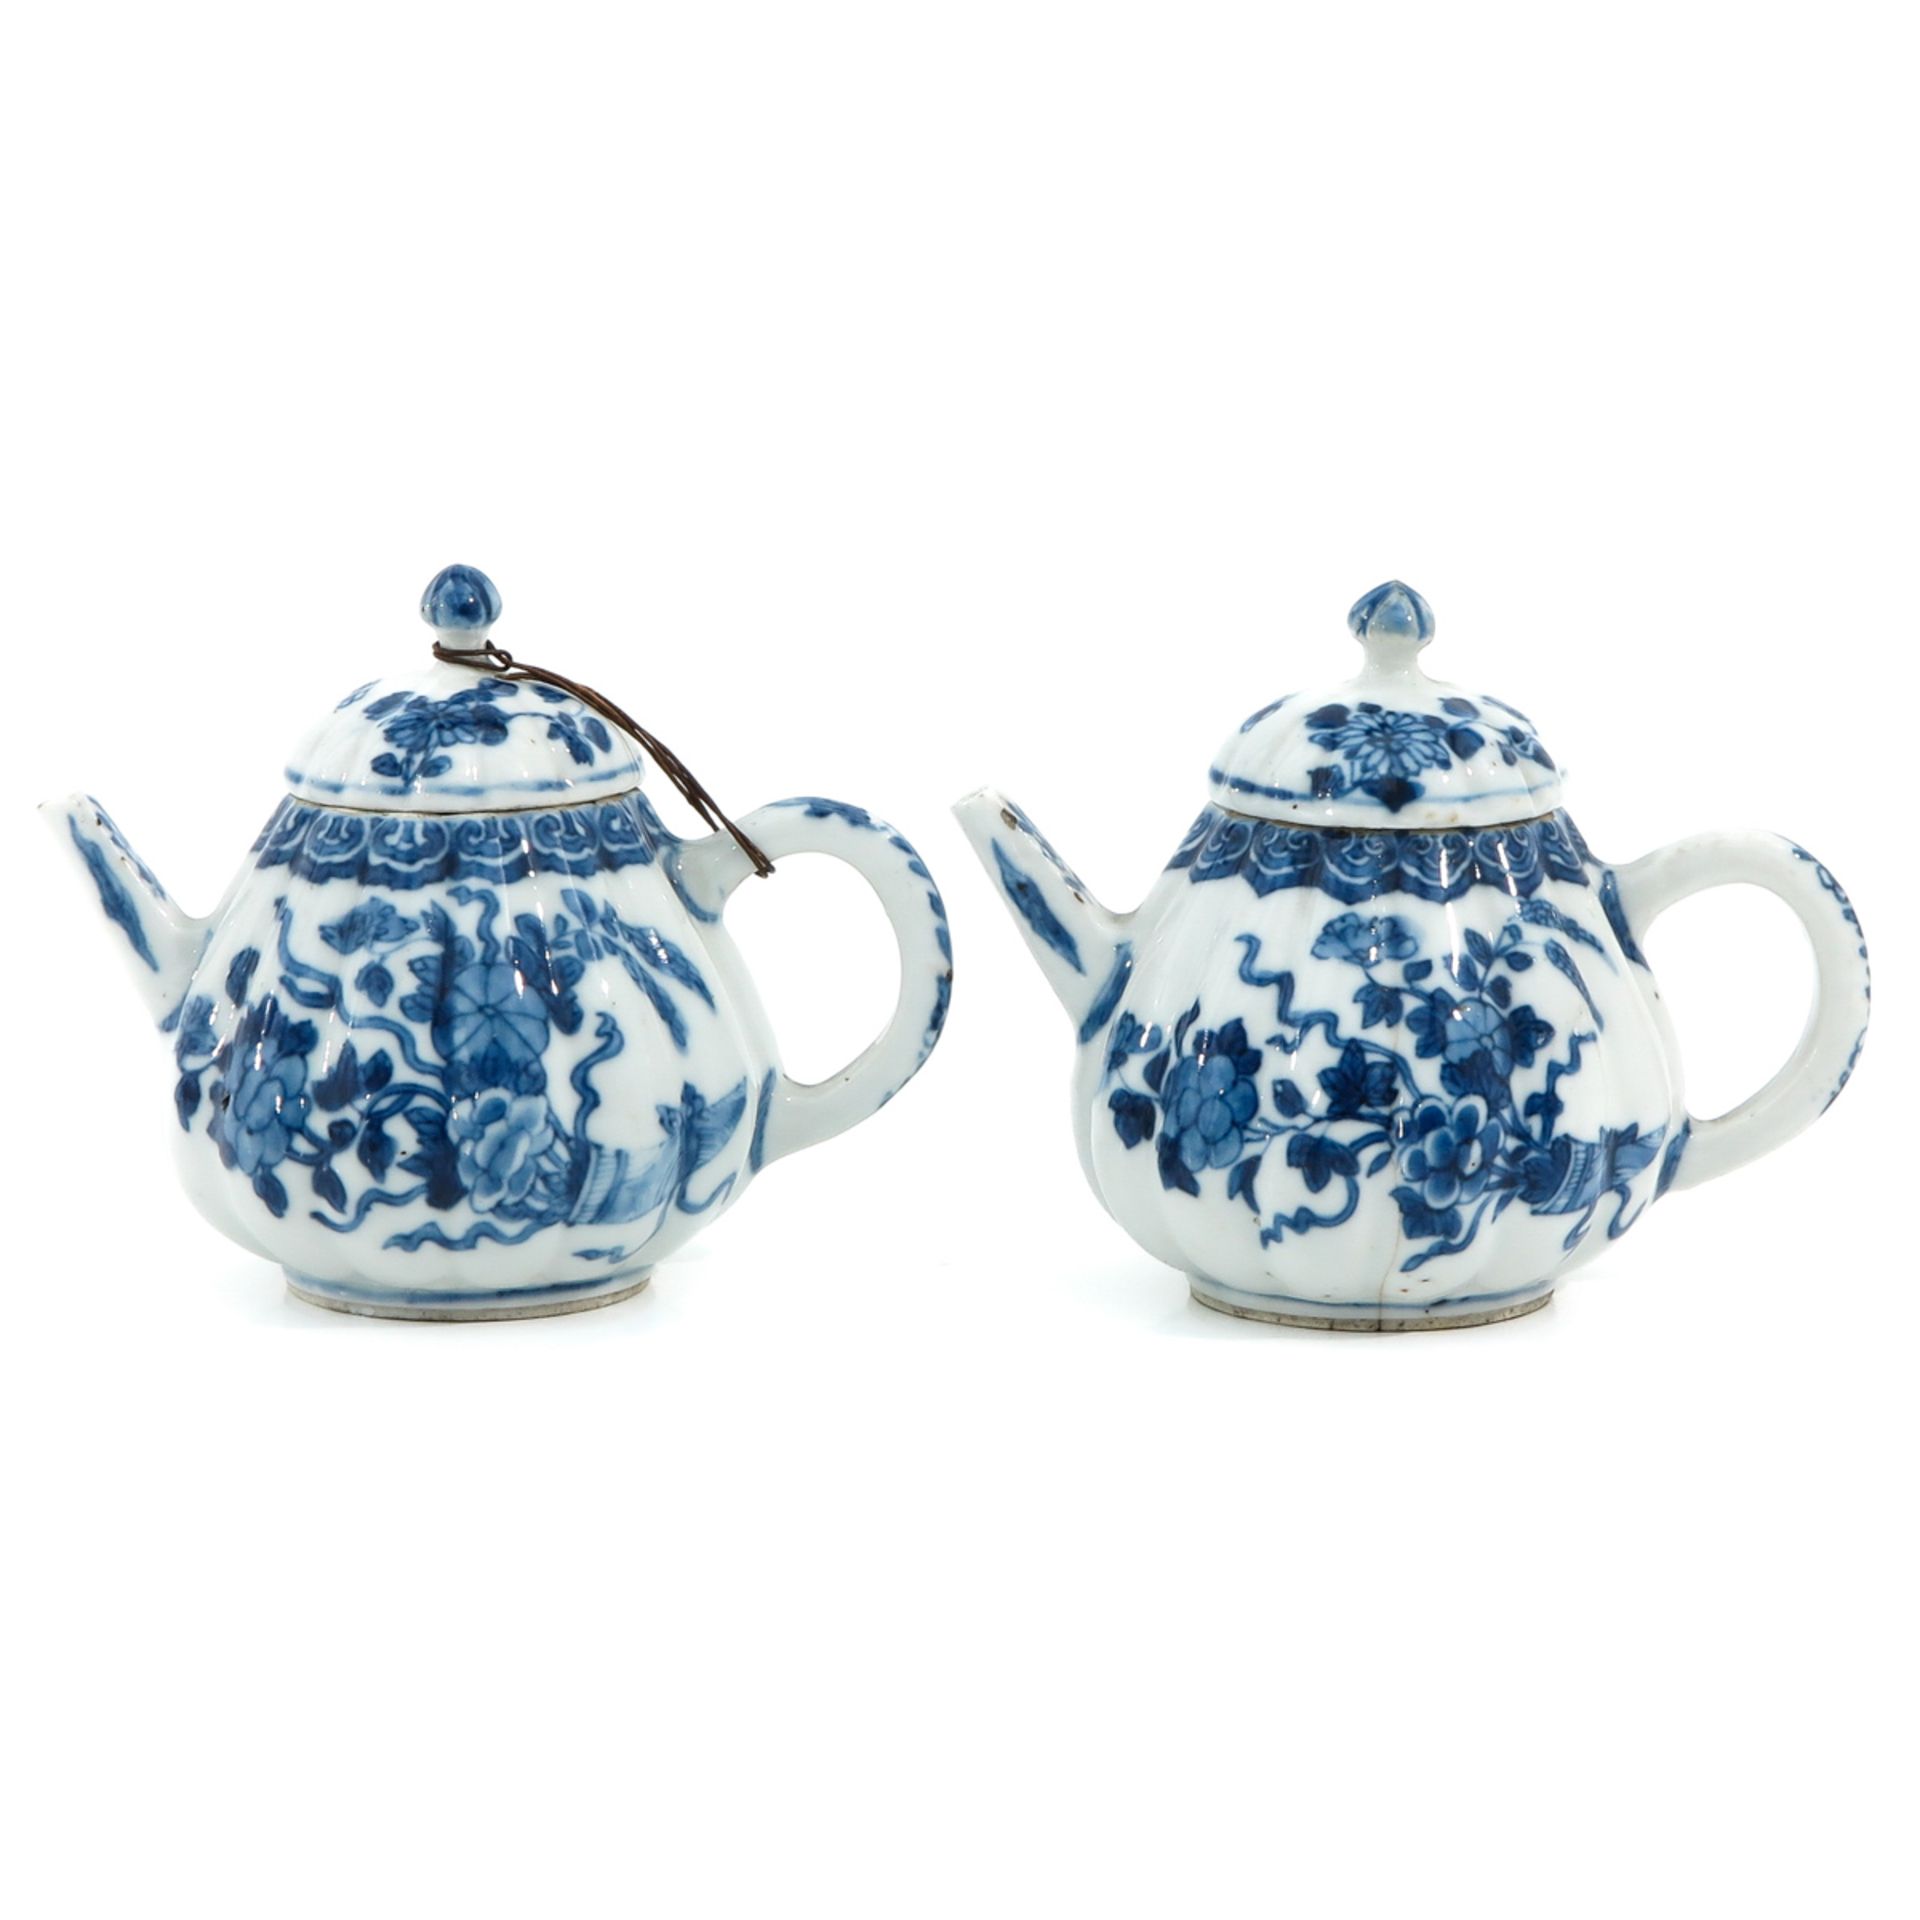 A Pair of Blue and White Teapots